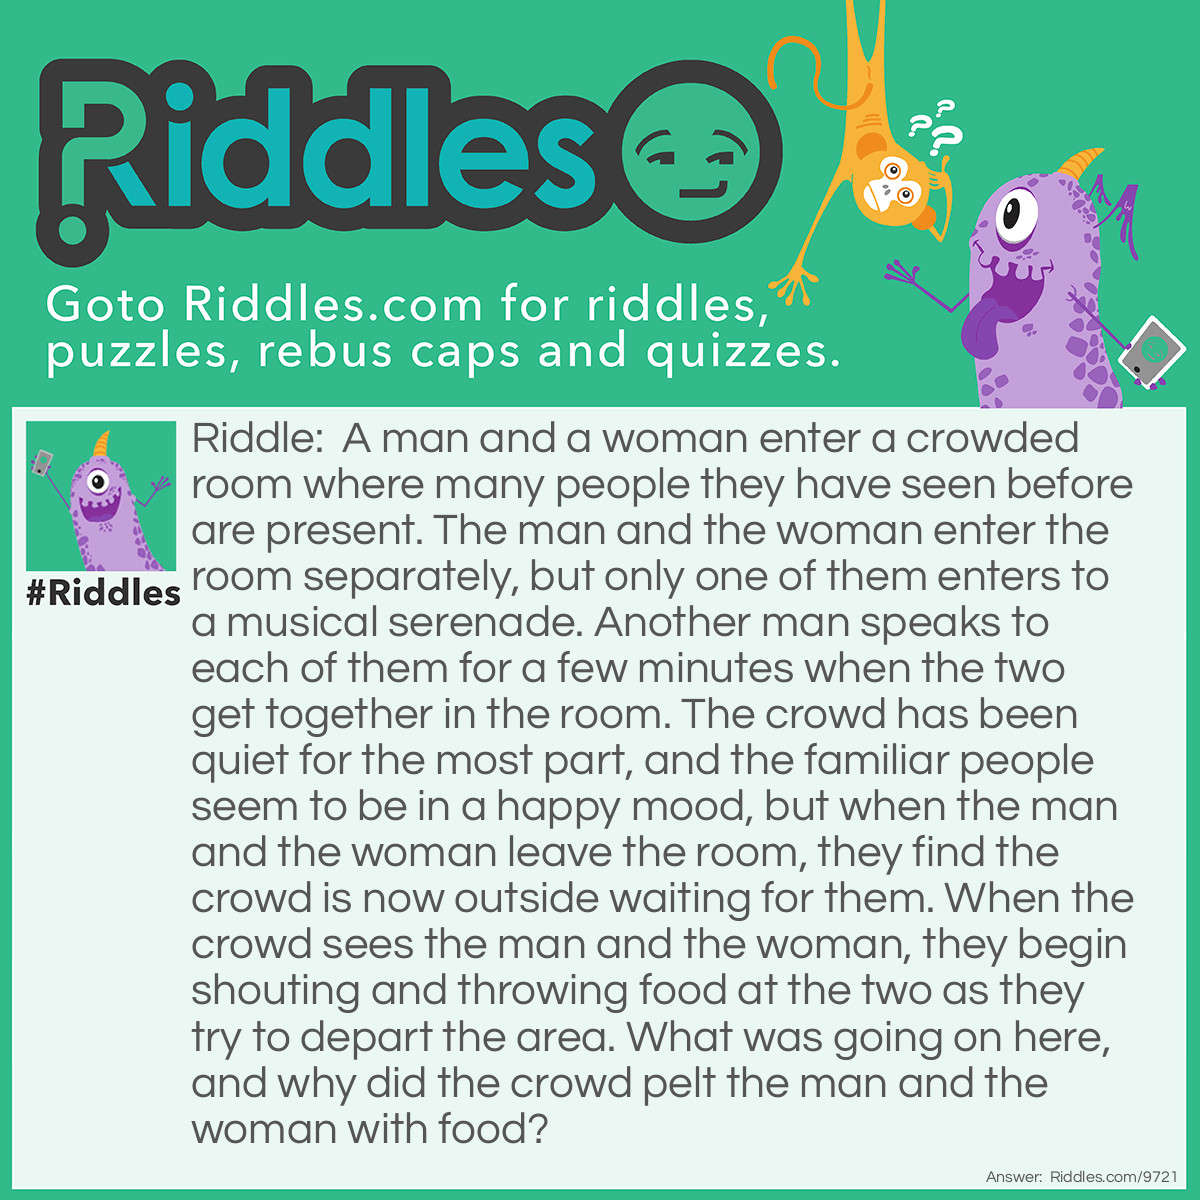 Riddle: A man and a woman enter a crowded room where many people they have seen before are present. The man and the woman enter the room separately, but only one of them enters to a musical serenade. Another man speaks to each of them for a few minutes when the two get together in the room. The crowd has been quiet for the most part, and the familiar people seem to be in a happy mood, but when the man and the woman leave the room, they find the crowd is now outside waiting for them. When the crowd sees the man and the woman, they begin shouting and throwing food at the two as they try to depart the area. What was going on here, and why did the crowd pelt the man and the woman with food? Answer: The man and the woman were getting married, and the food being thrown at them was rice.